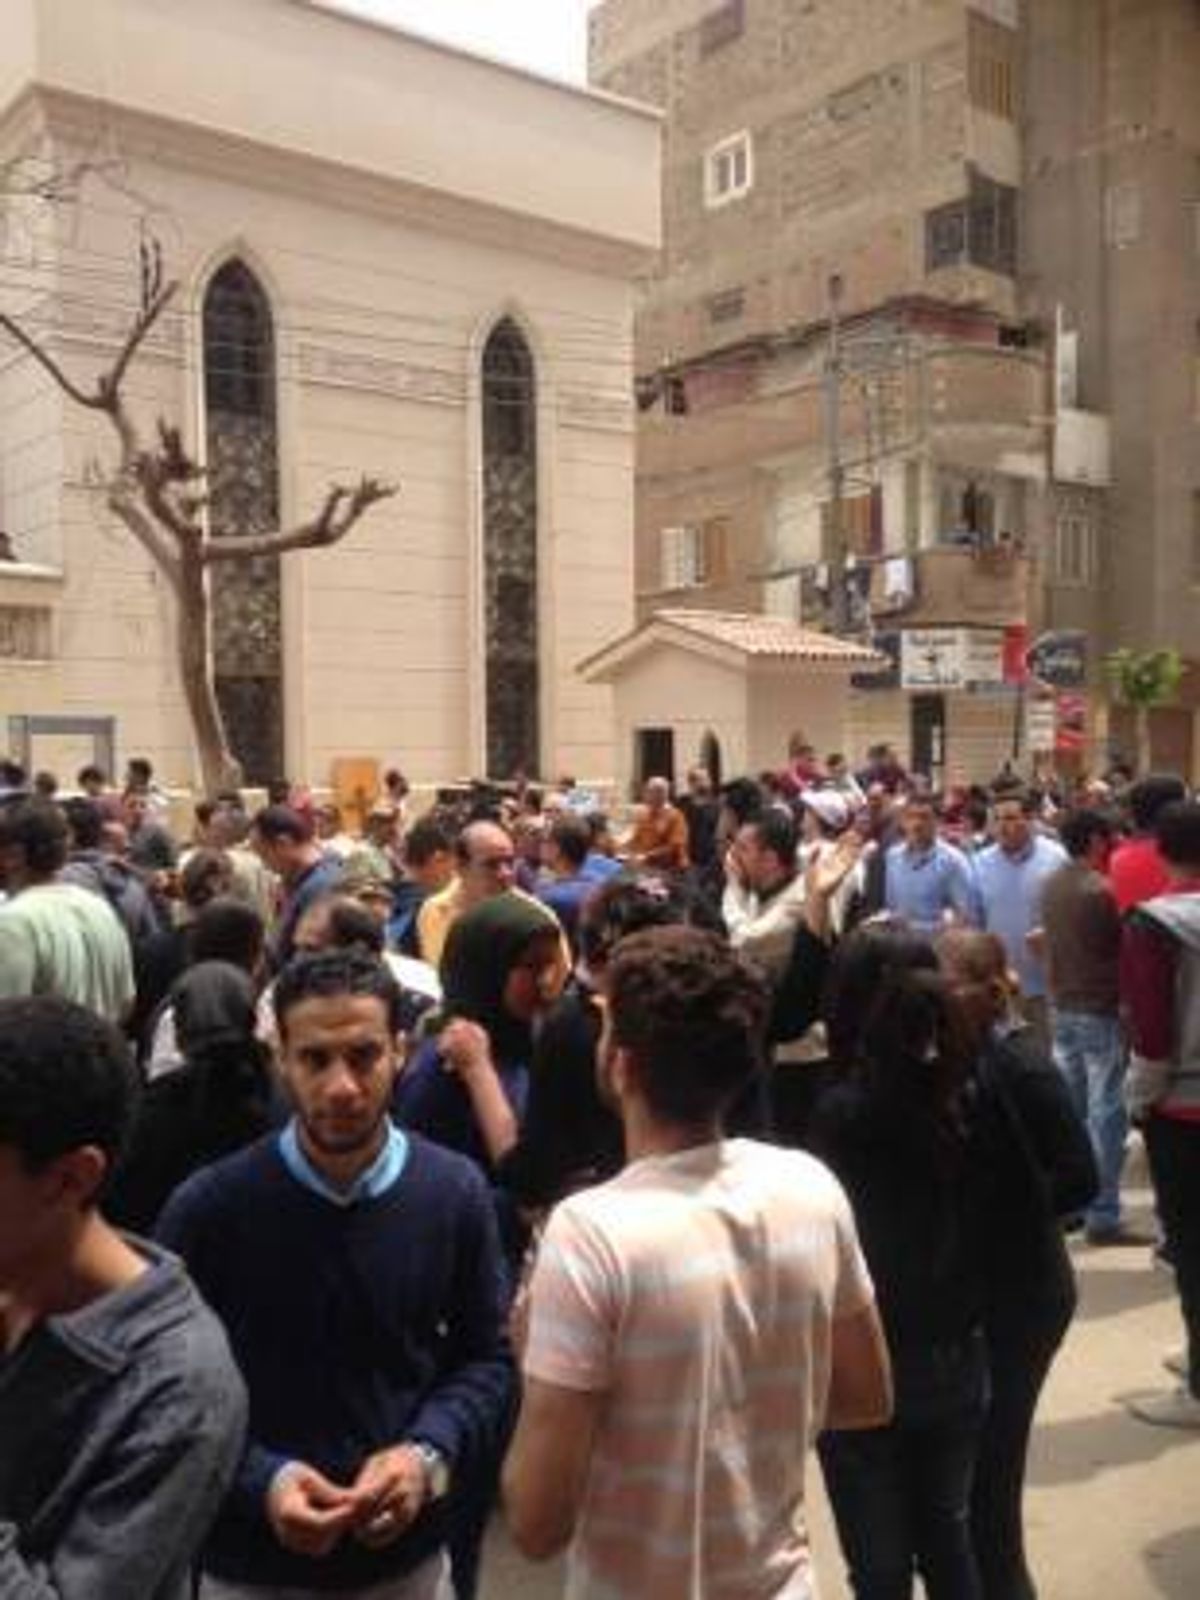 Relatives and onlookers gather outside a church after a bomb attack in the Nile Delta town of Tanta, Egypt. (AP)